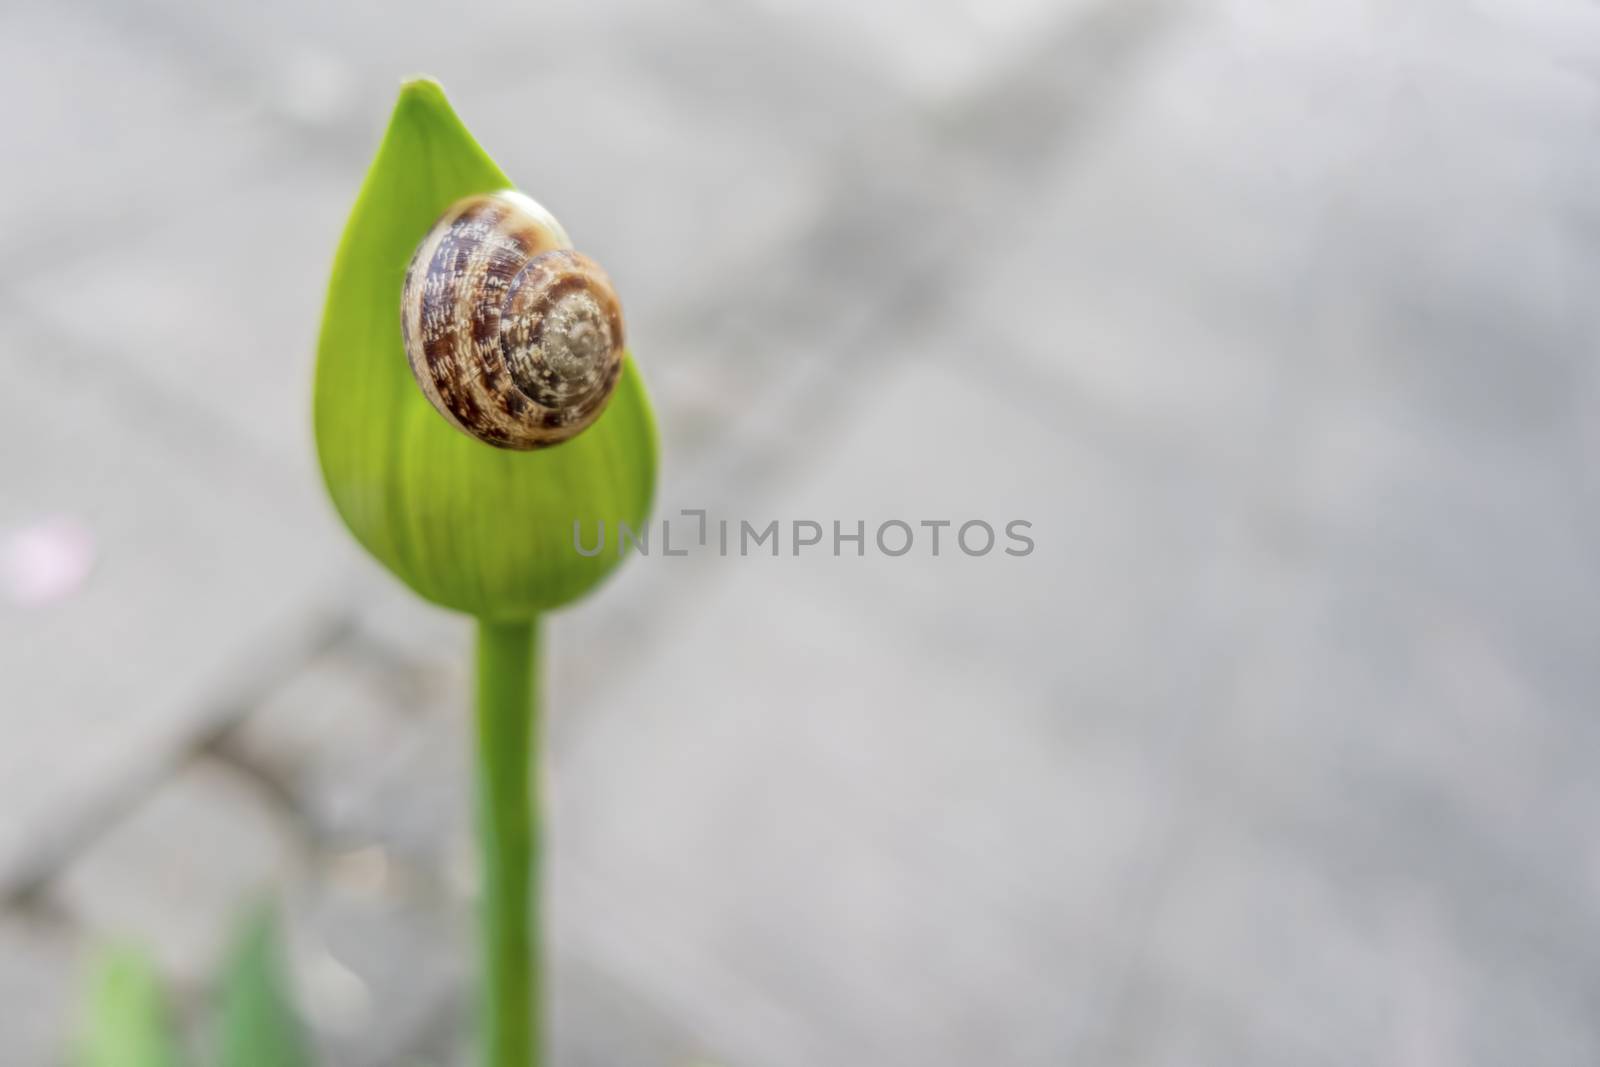 snail on a leaf in nature